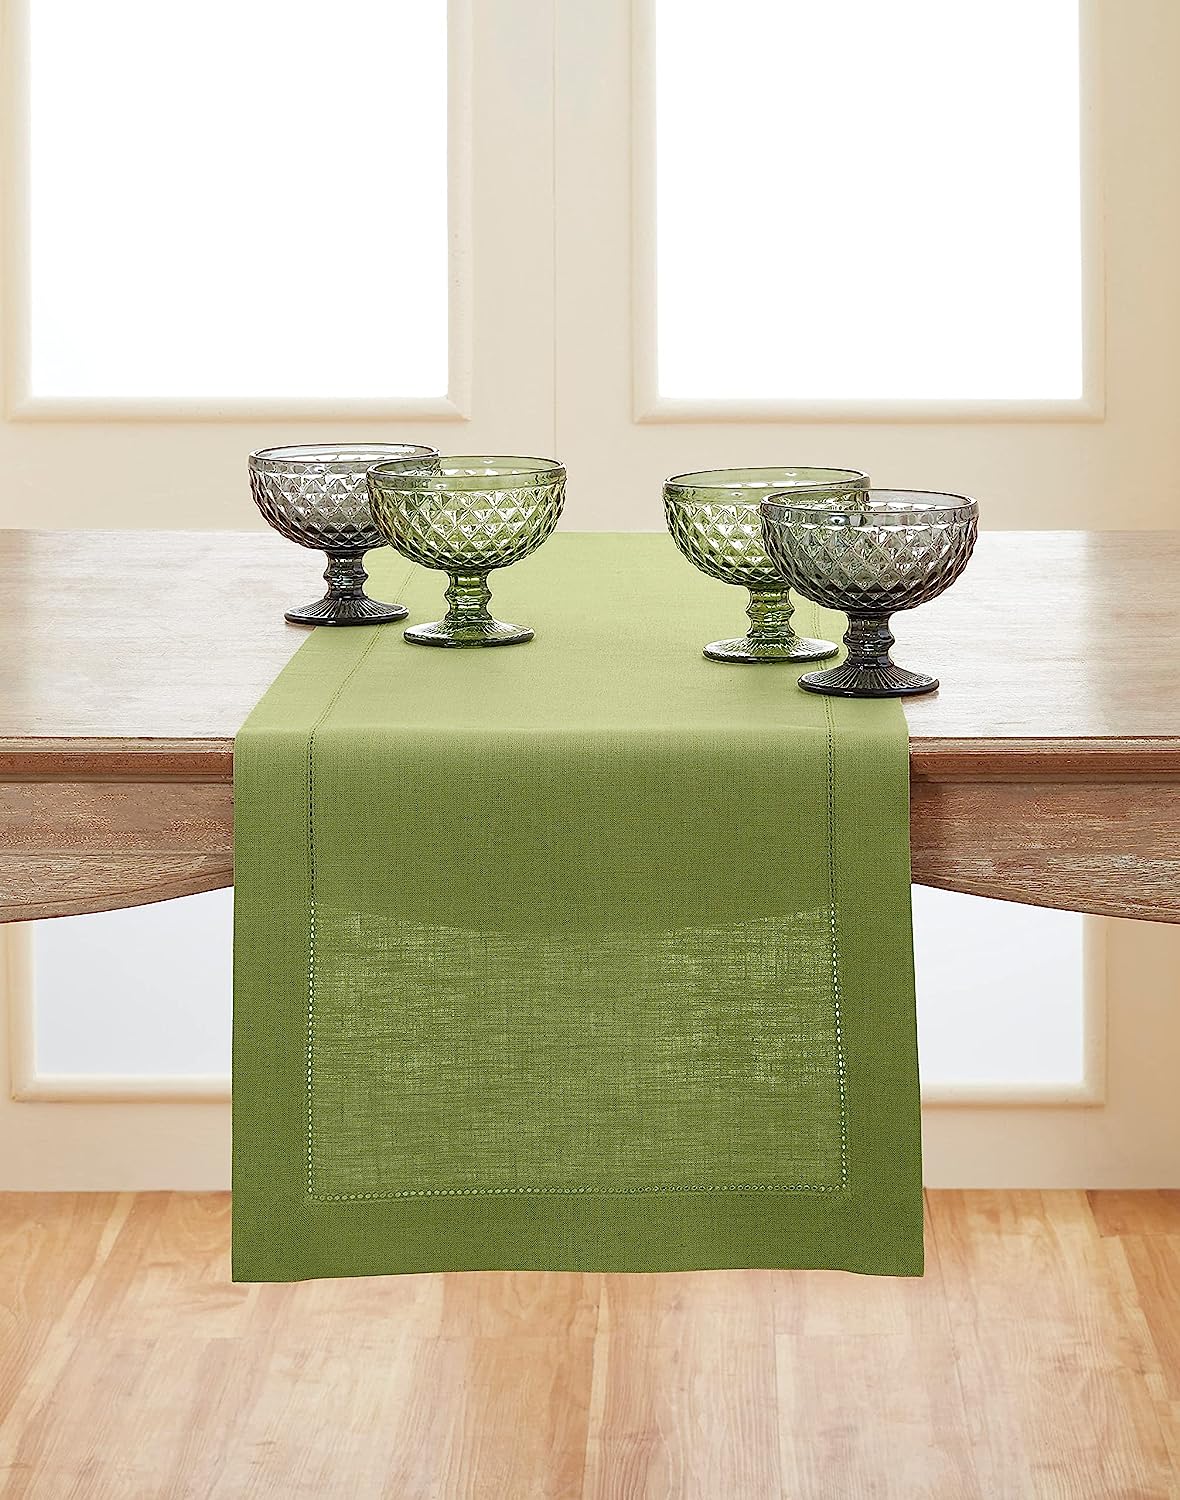 Hemstitched Table Linens (Moss Green Color)